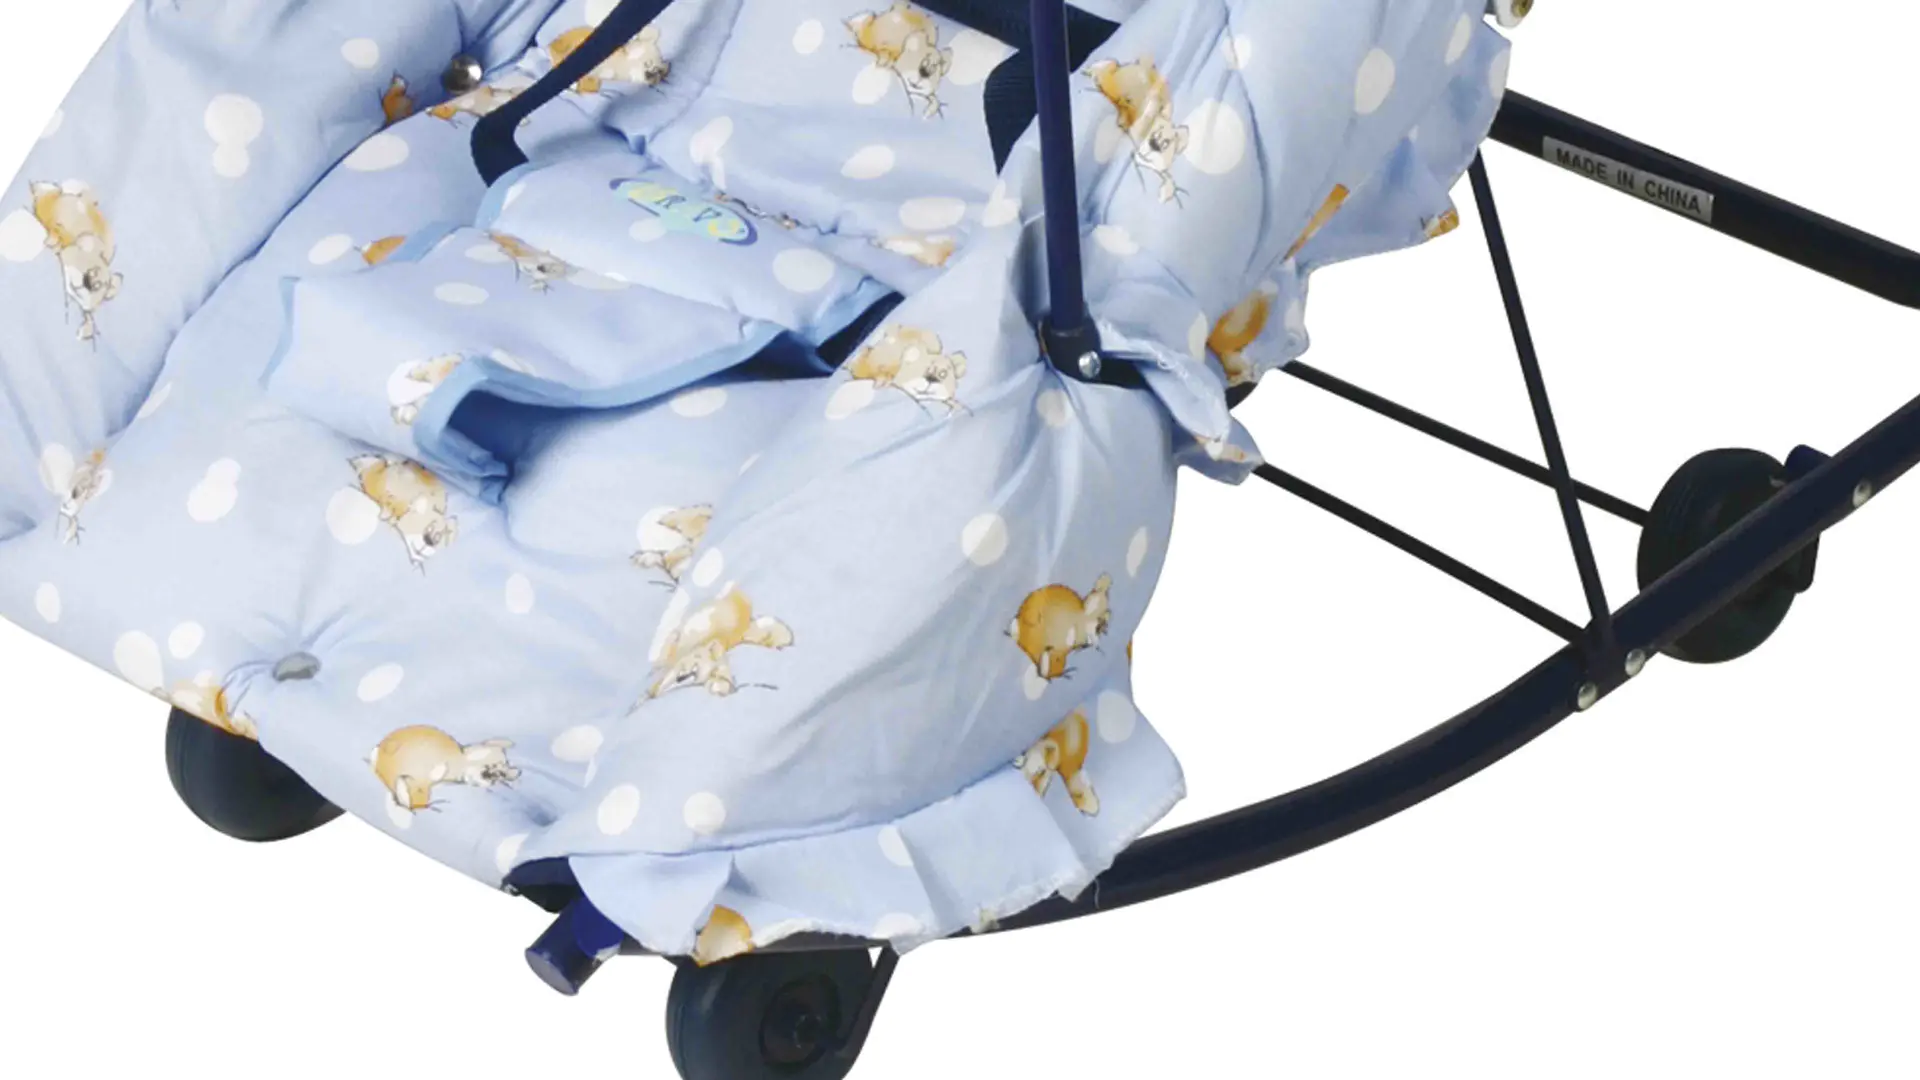 canopy baby rocking chairs for sale stable Aoqi company